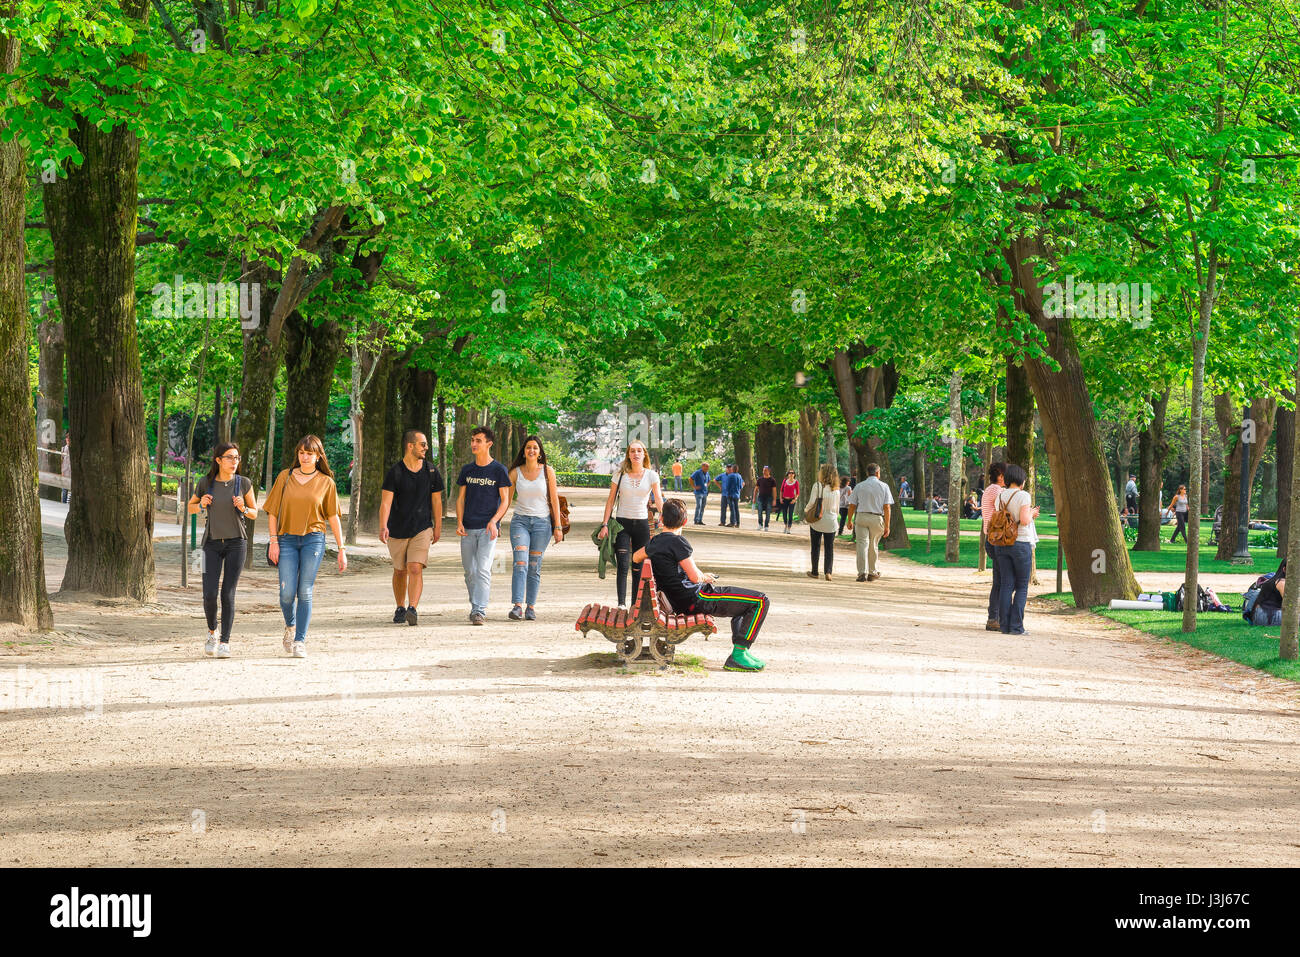 Porto Portugal park, view of young people walking and relaxing in the Jardins do Palacio de Cristal park in Porto, Portugal. Stock Photo